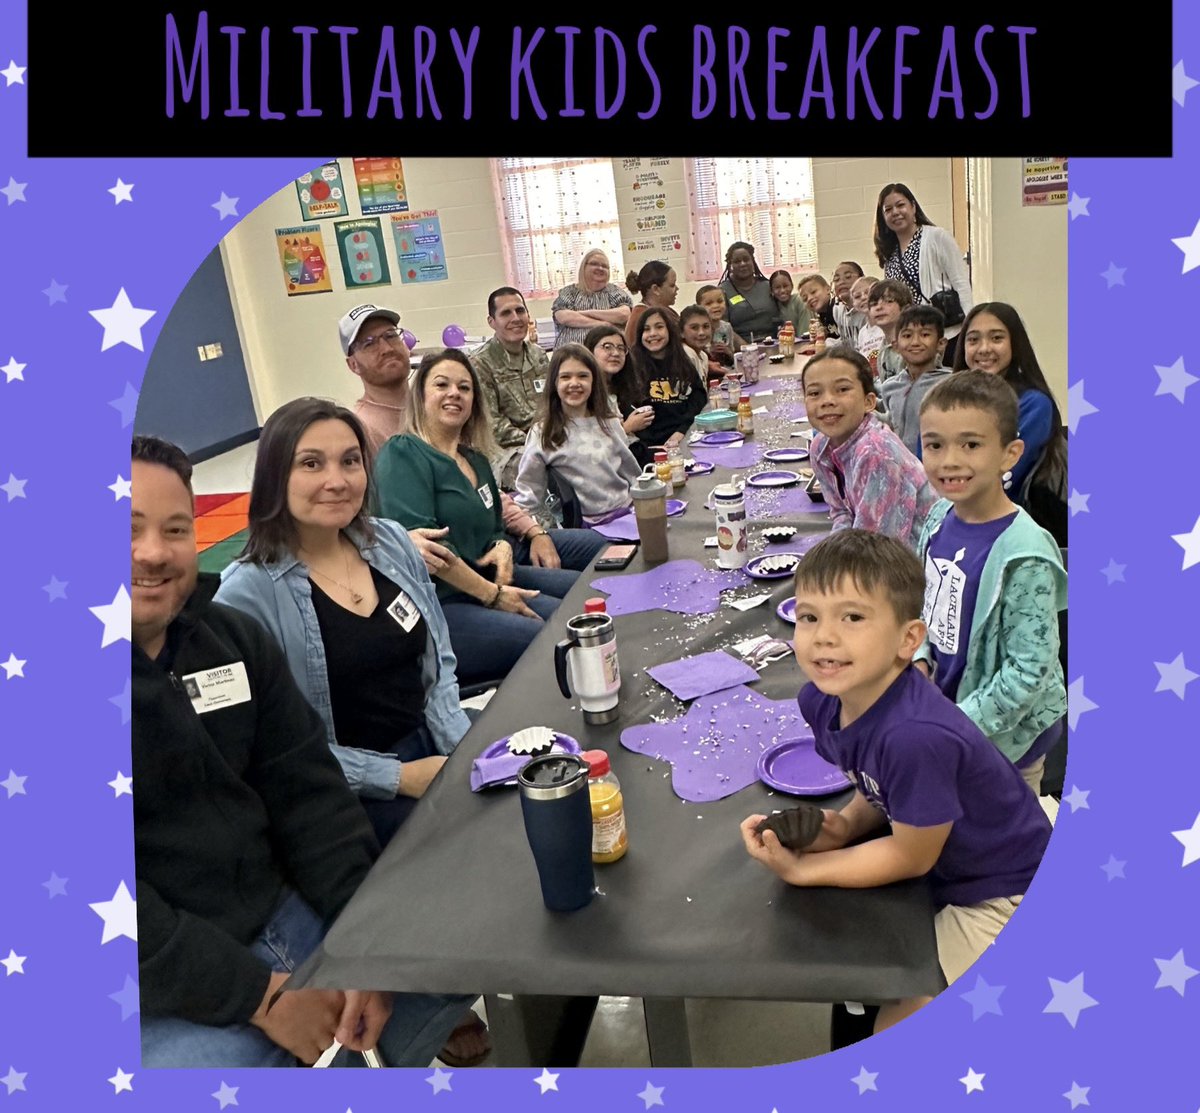 💜 Military Kids Breakfast 💜 
This month we recognize all of our little heroes for their sacrifices & service! @Ms_Moore_Cares @LieckCounseling @NISDLieck @NISDCounseling @NISD @MilitaryChild #MonthoftheMilitaryChild